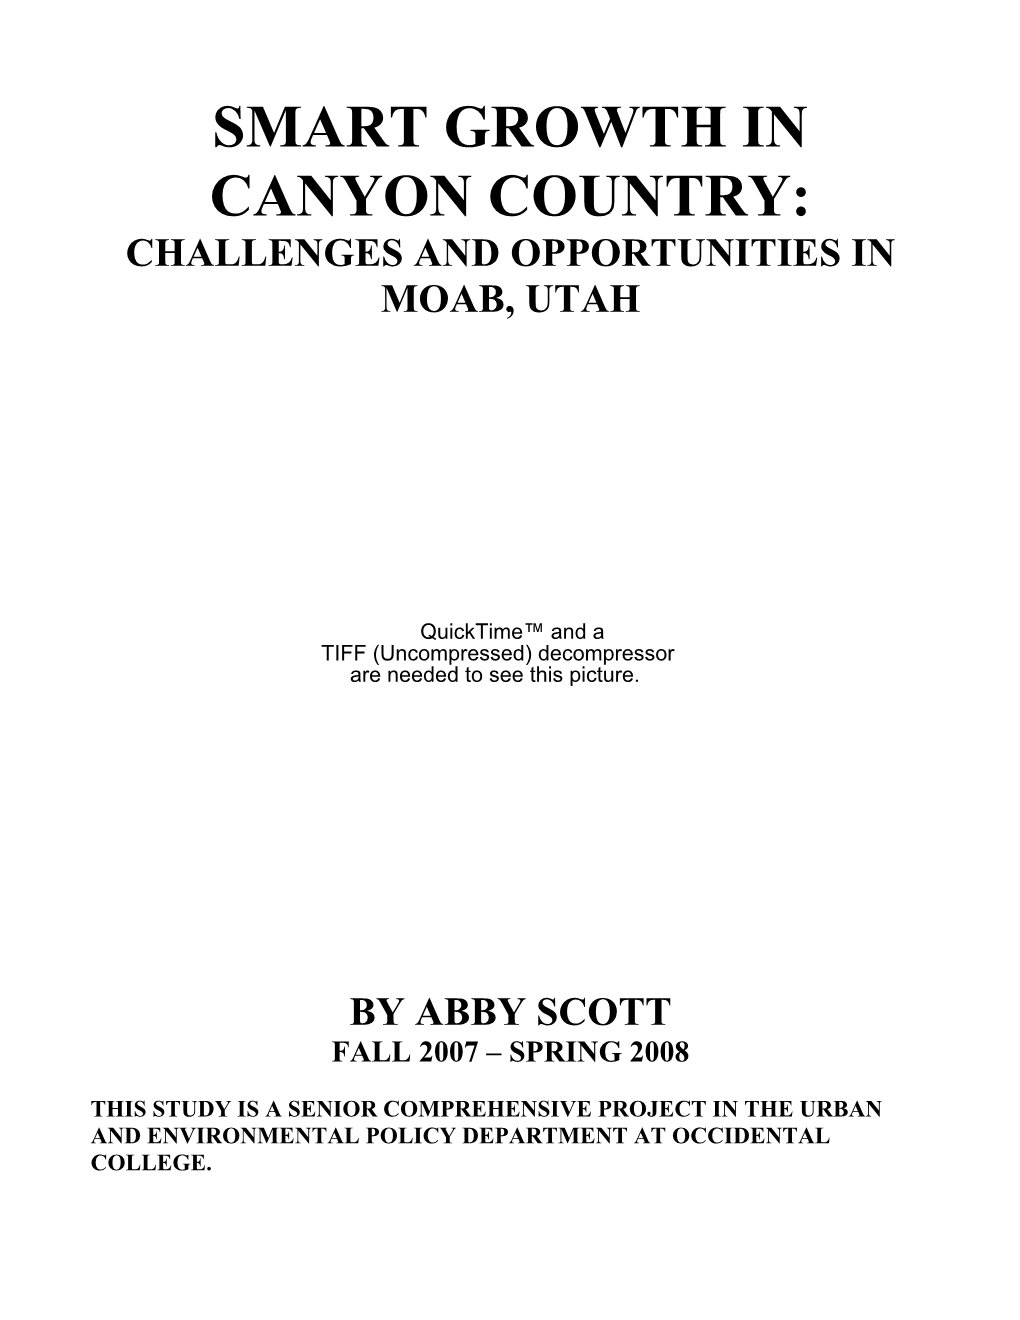 Smart Growth in Canyon Country: Challenges and Opportunities in Moab, Utah